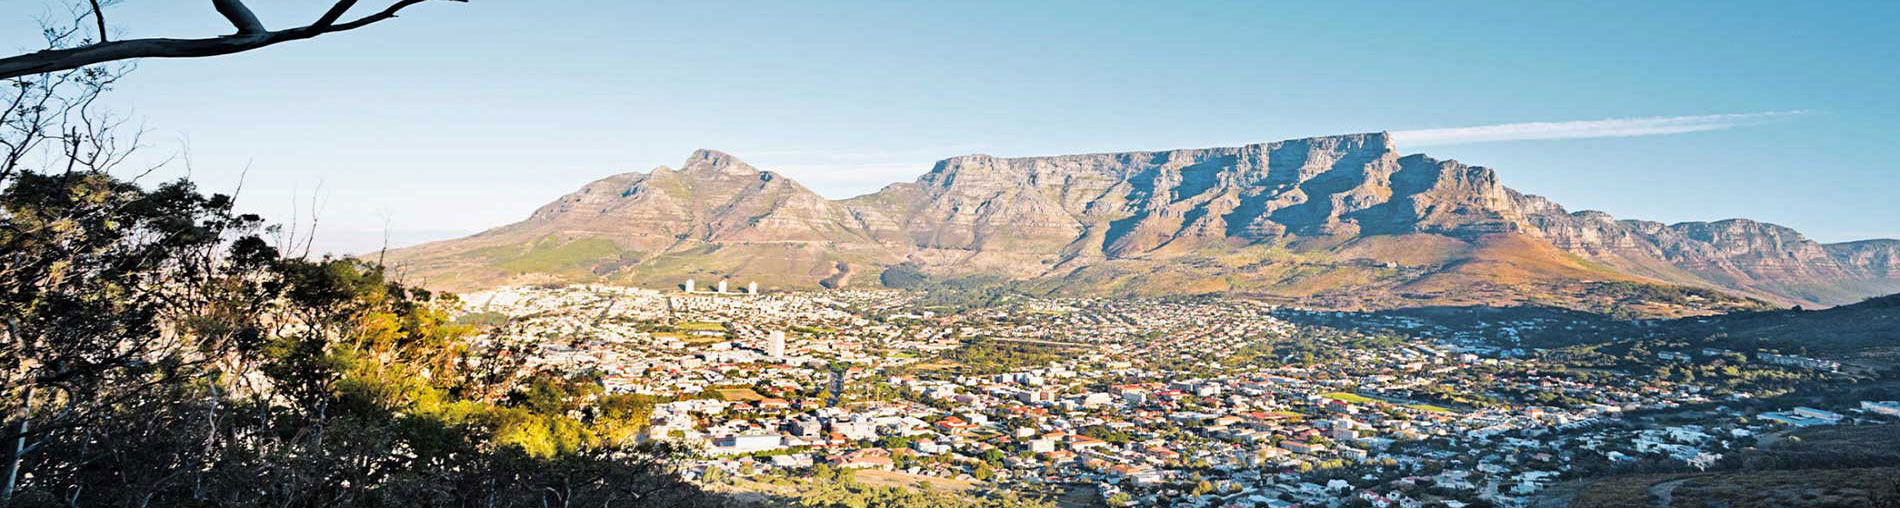 Best Of South Africa Holiday Package - 9 Nights